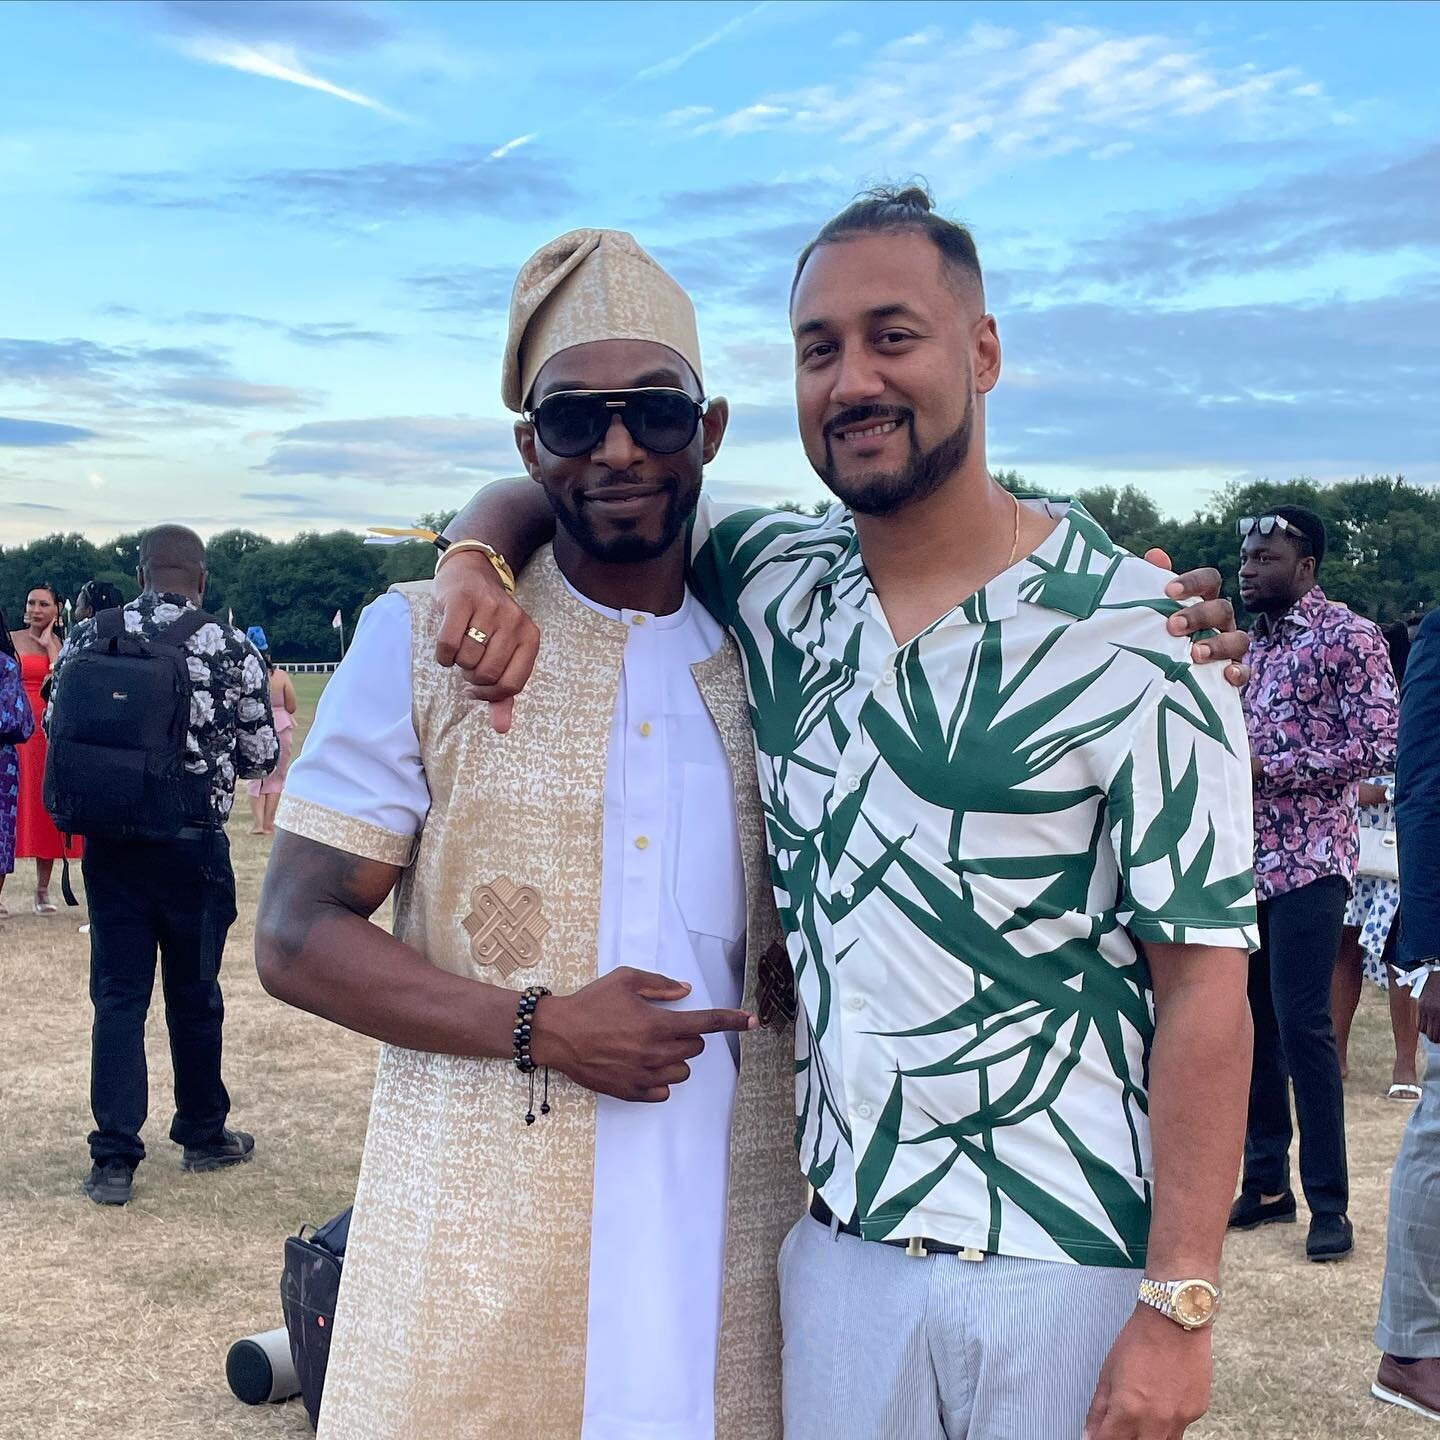 @luxafriquepolo getting bigger and better year upon year. A truly special celebration of African culture. Thanks @alexanderamosu for the hospitality and vibes as always. 🐎 🐎